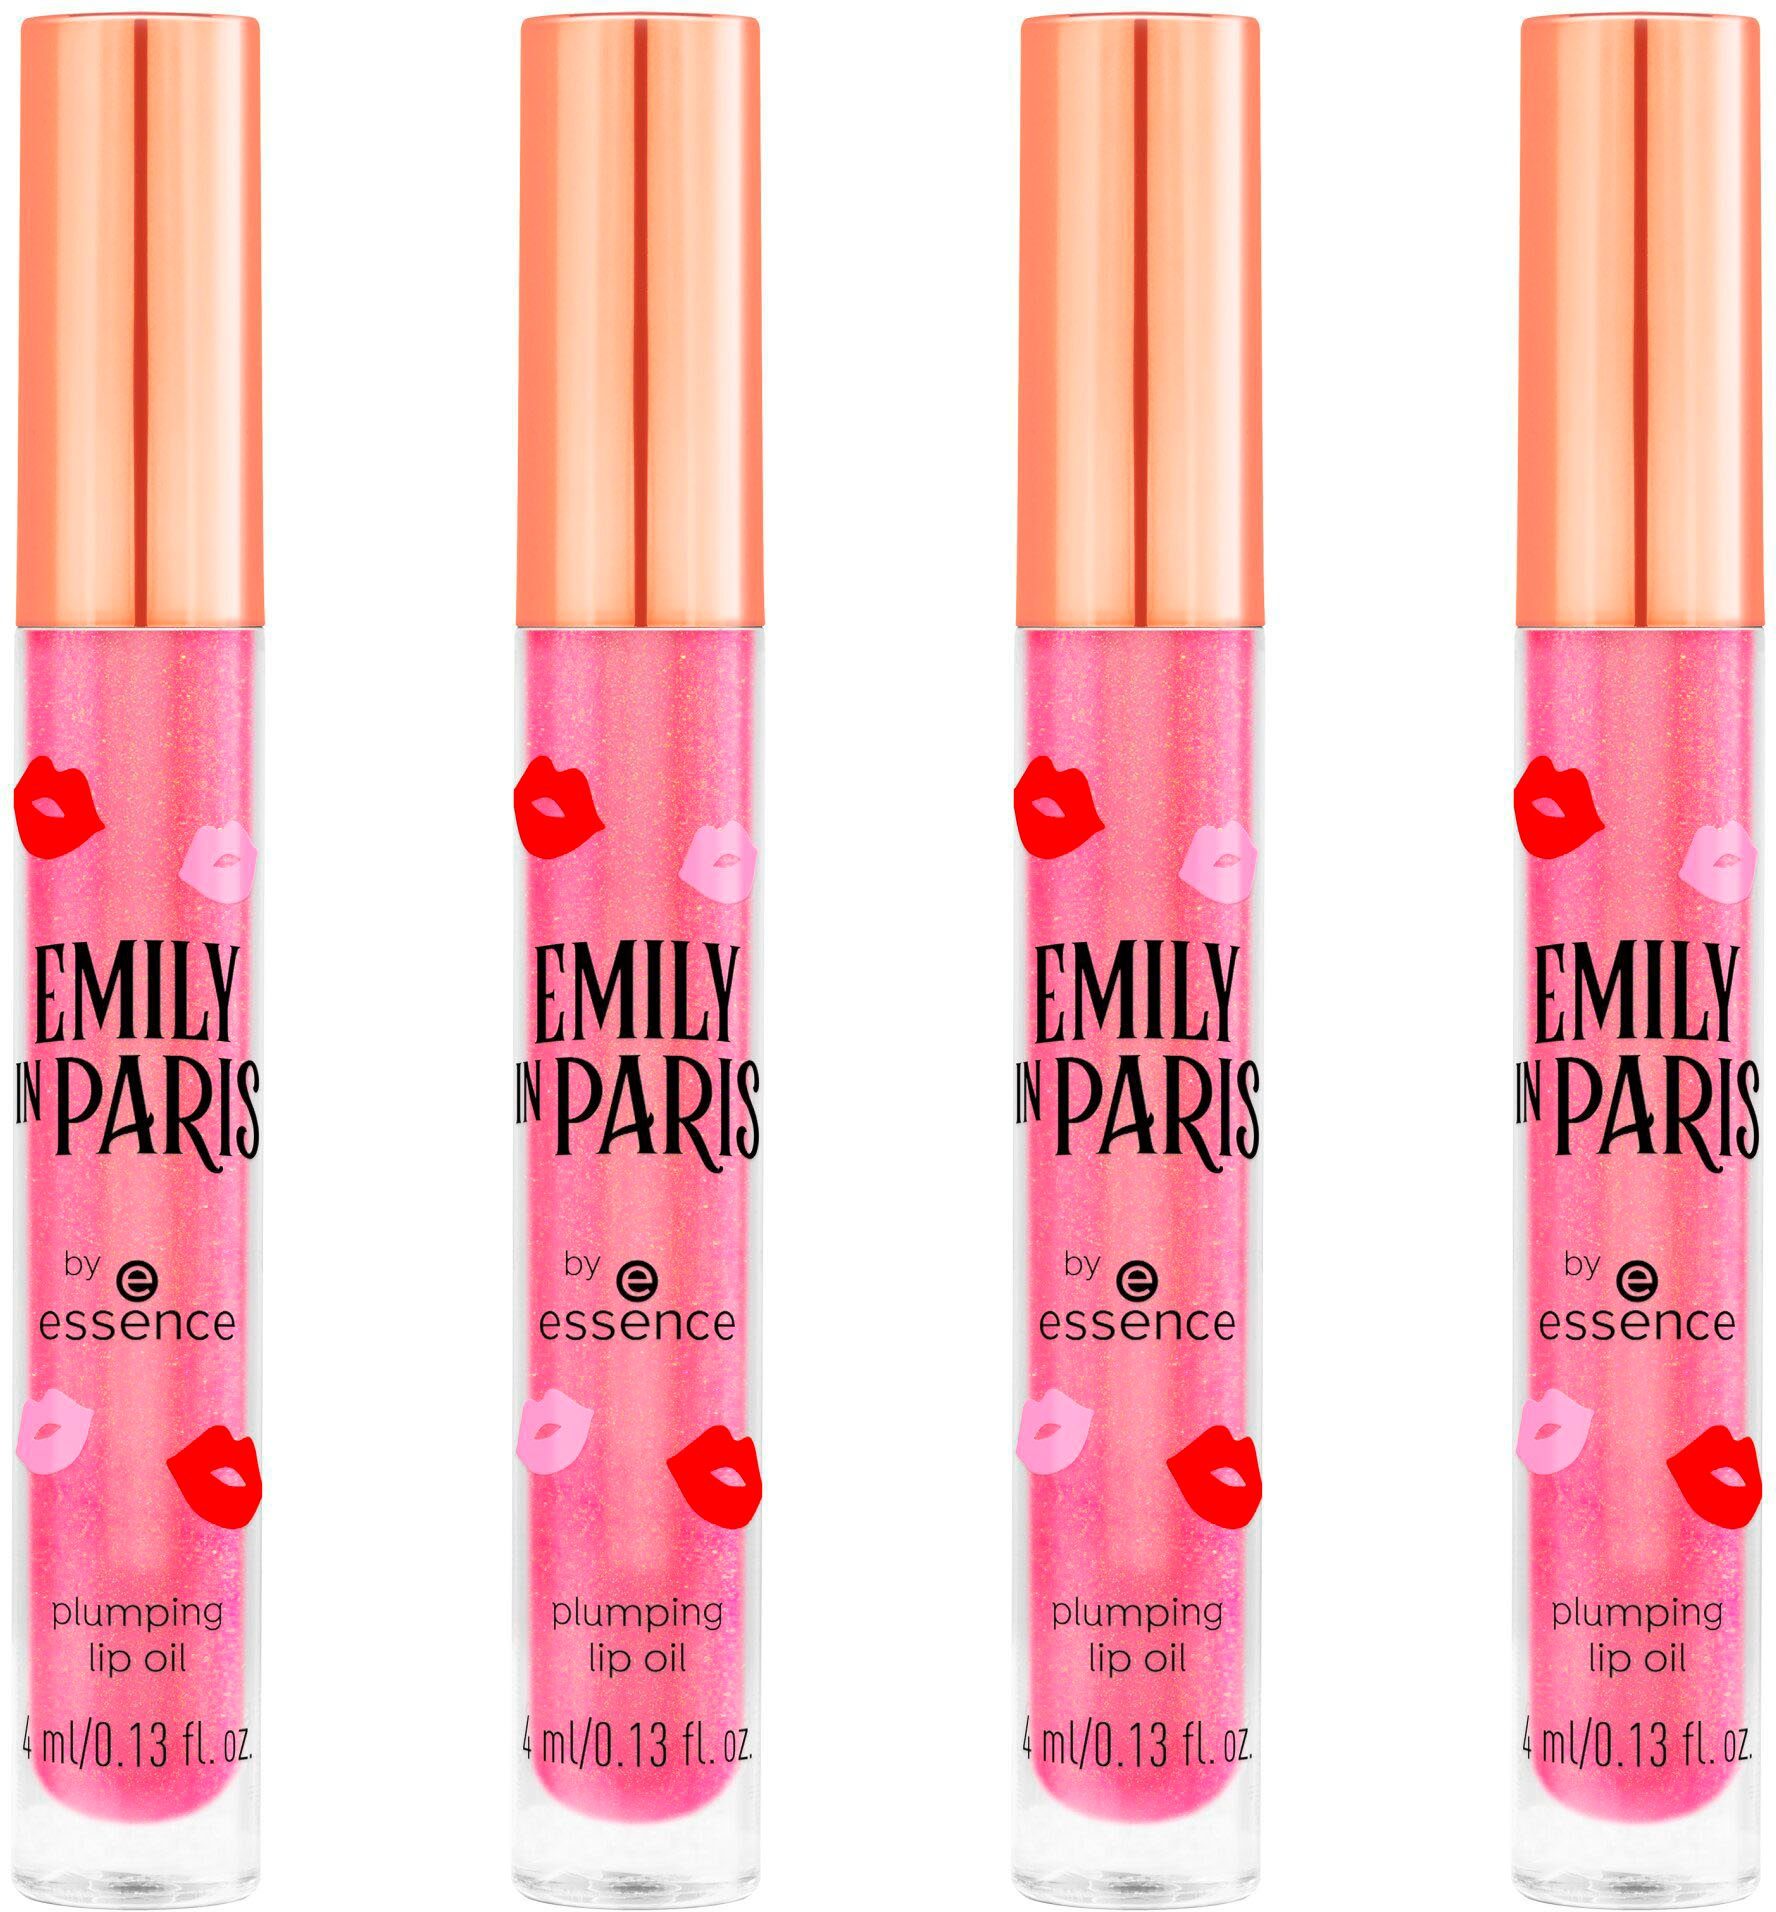 IN essence plumping oil lip Lipgloss PARIS by EMILY Essence